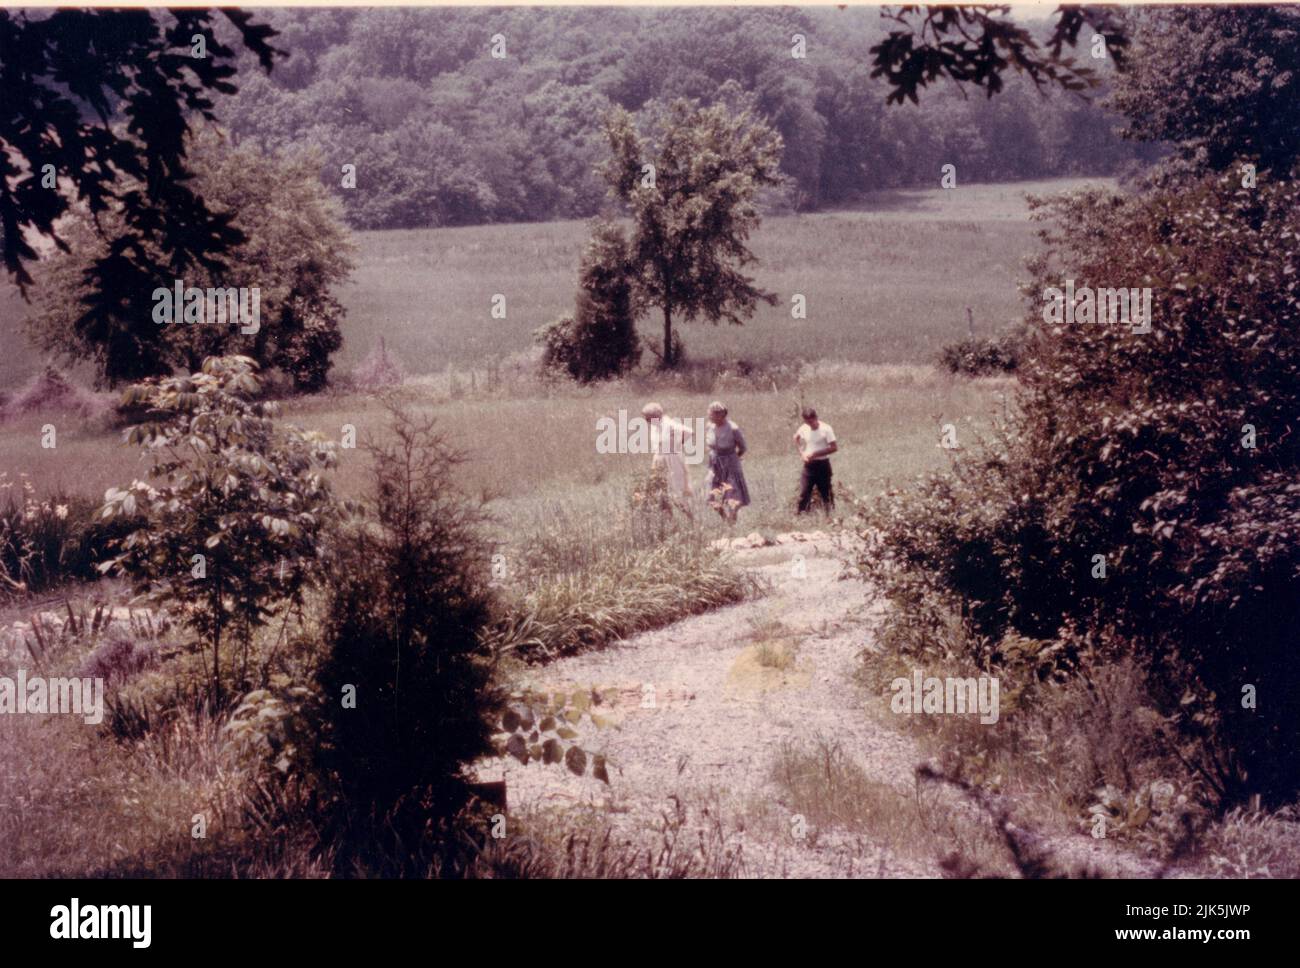 Legendary US spy, Virginia Hall Goillot is seen in this 1970's photograph with her husband, Paul Gaston Goillot and an unidentified friend walking in the meadows behind their house. Virginia and Paul spent hundreds of hours planting bulbs there (Paul dug the hole, Dindy placed the bulb) and if you visited on the right day, you would see the fields bejeweled with colorful flowers. Virginia was grateful for this tranquil place after her extraordinary 25 year career in espionage which spanned WW2 and the Cold War. Stock Photo